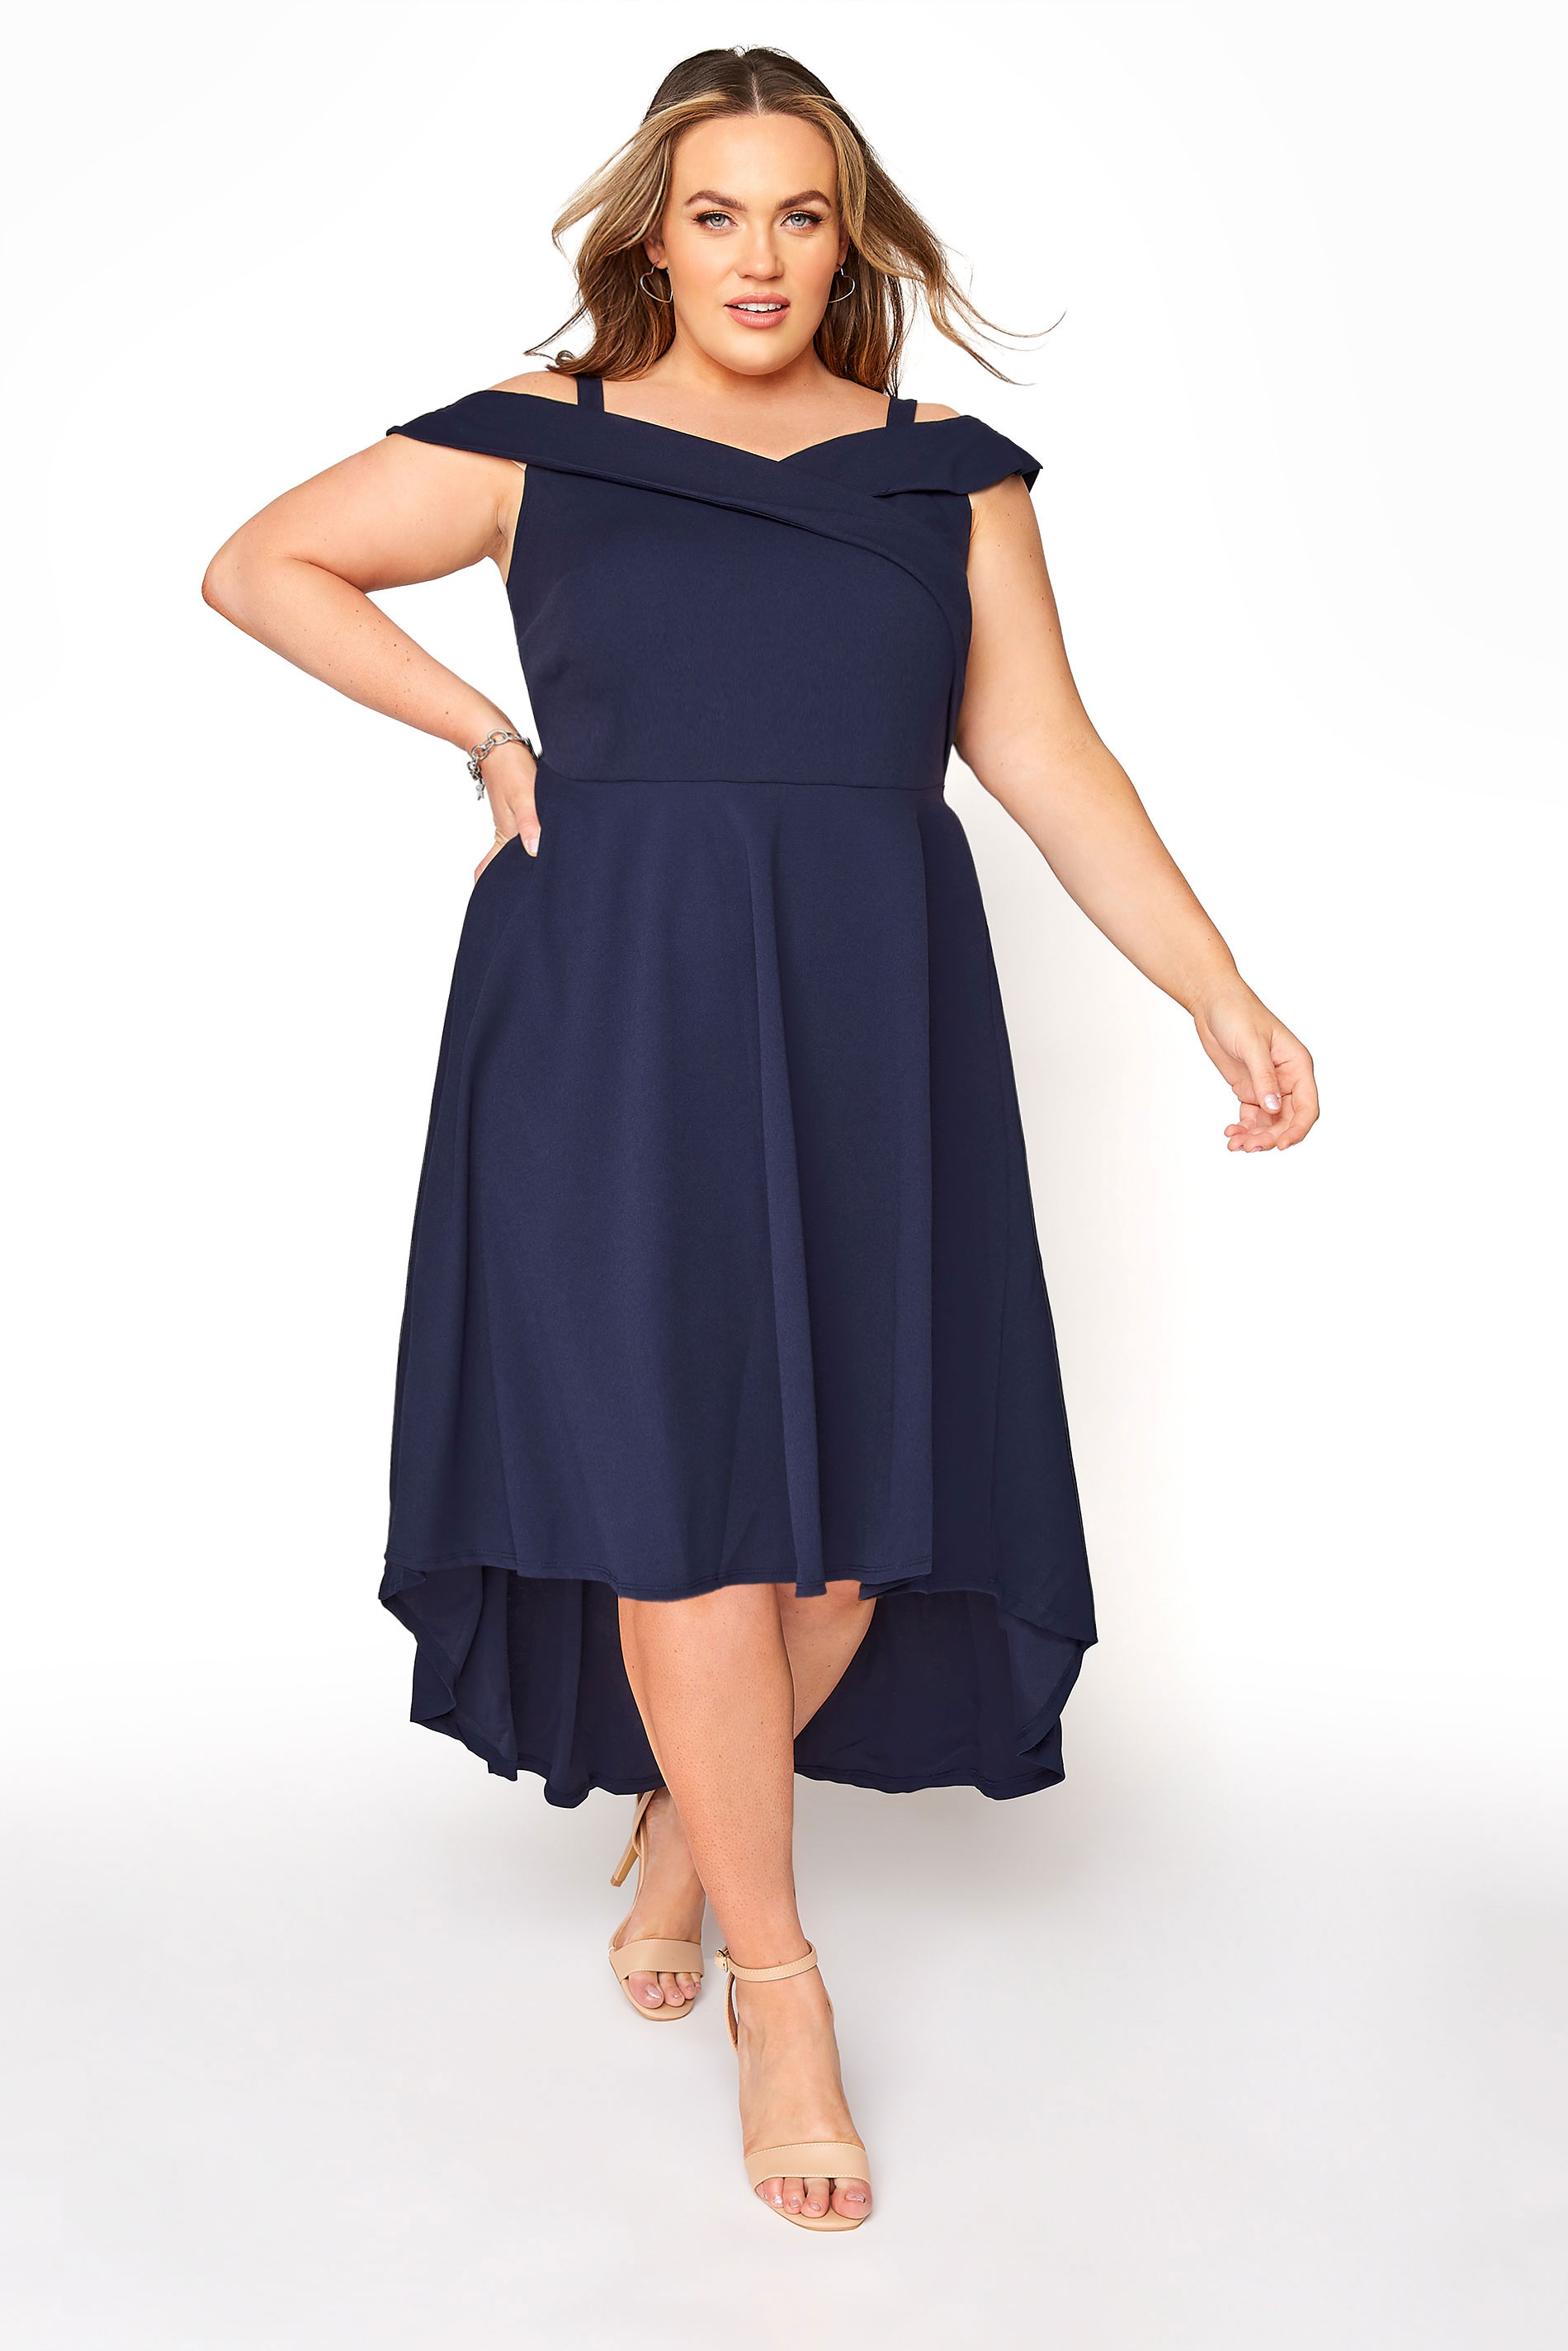 YOURS LONDON Navy Bardot High Low Dress | Yours Clothing 1